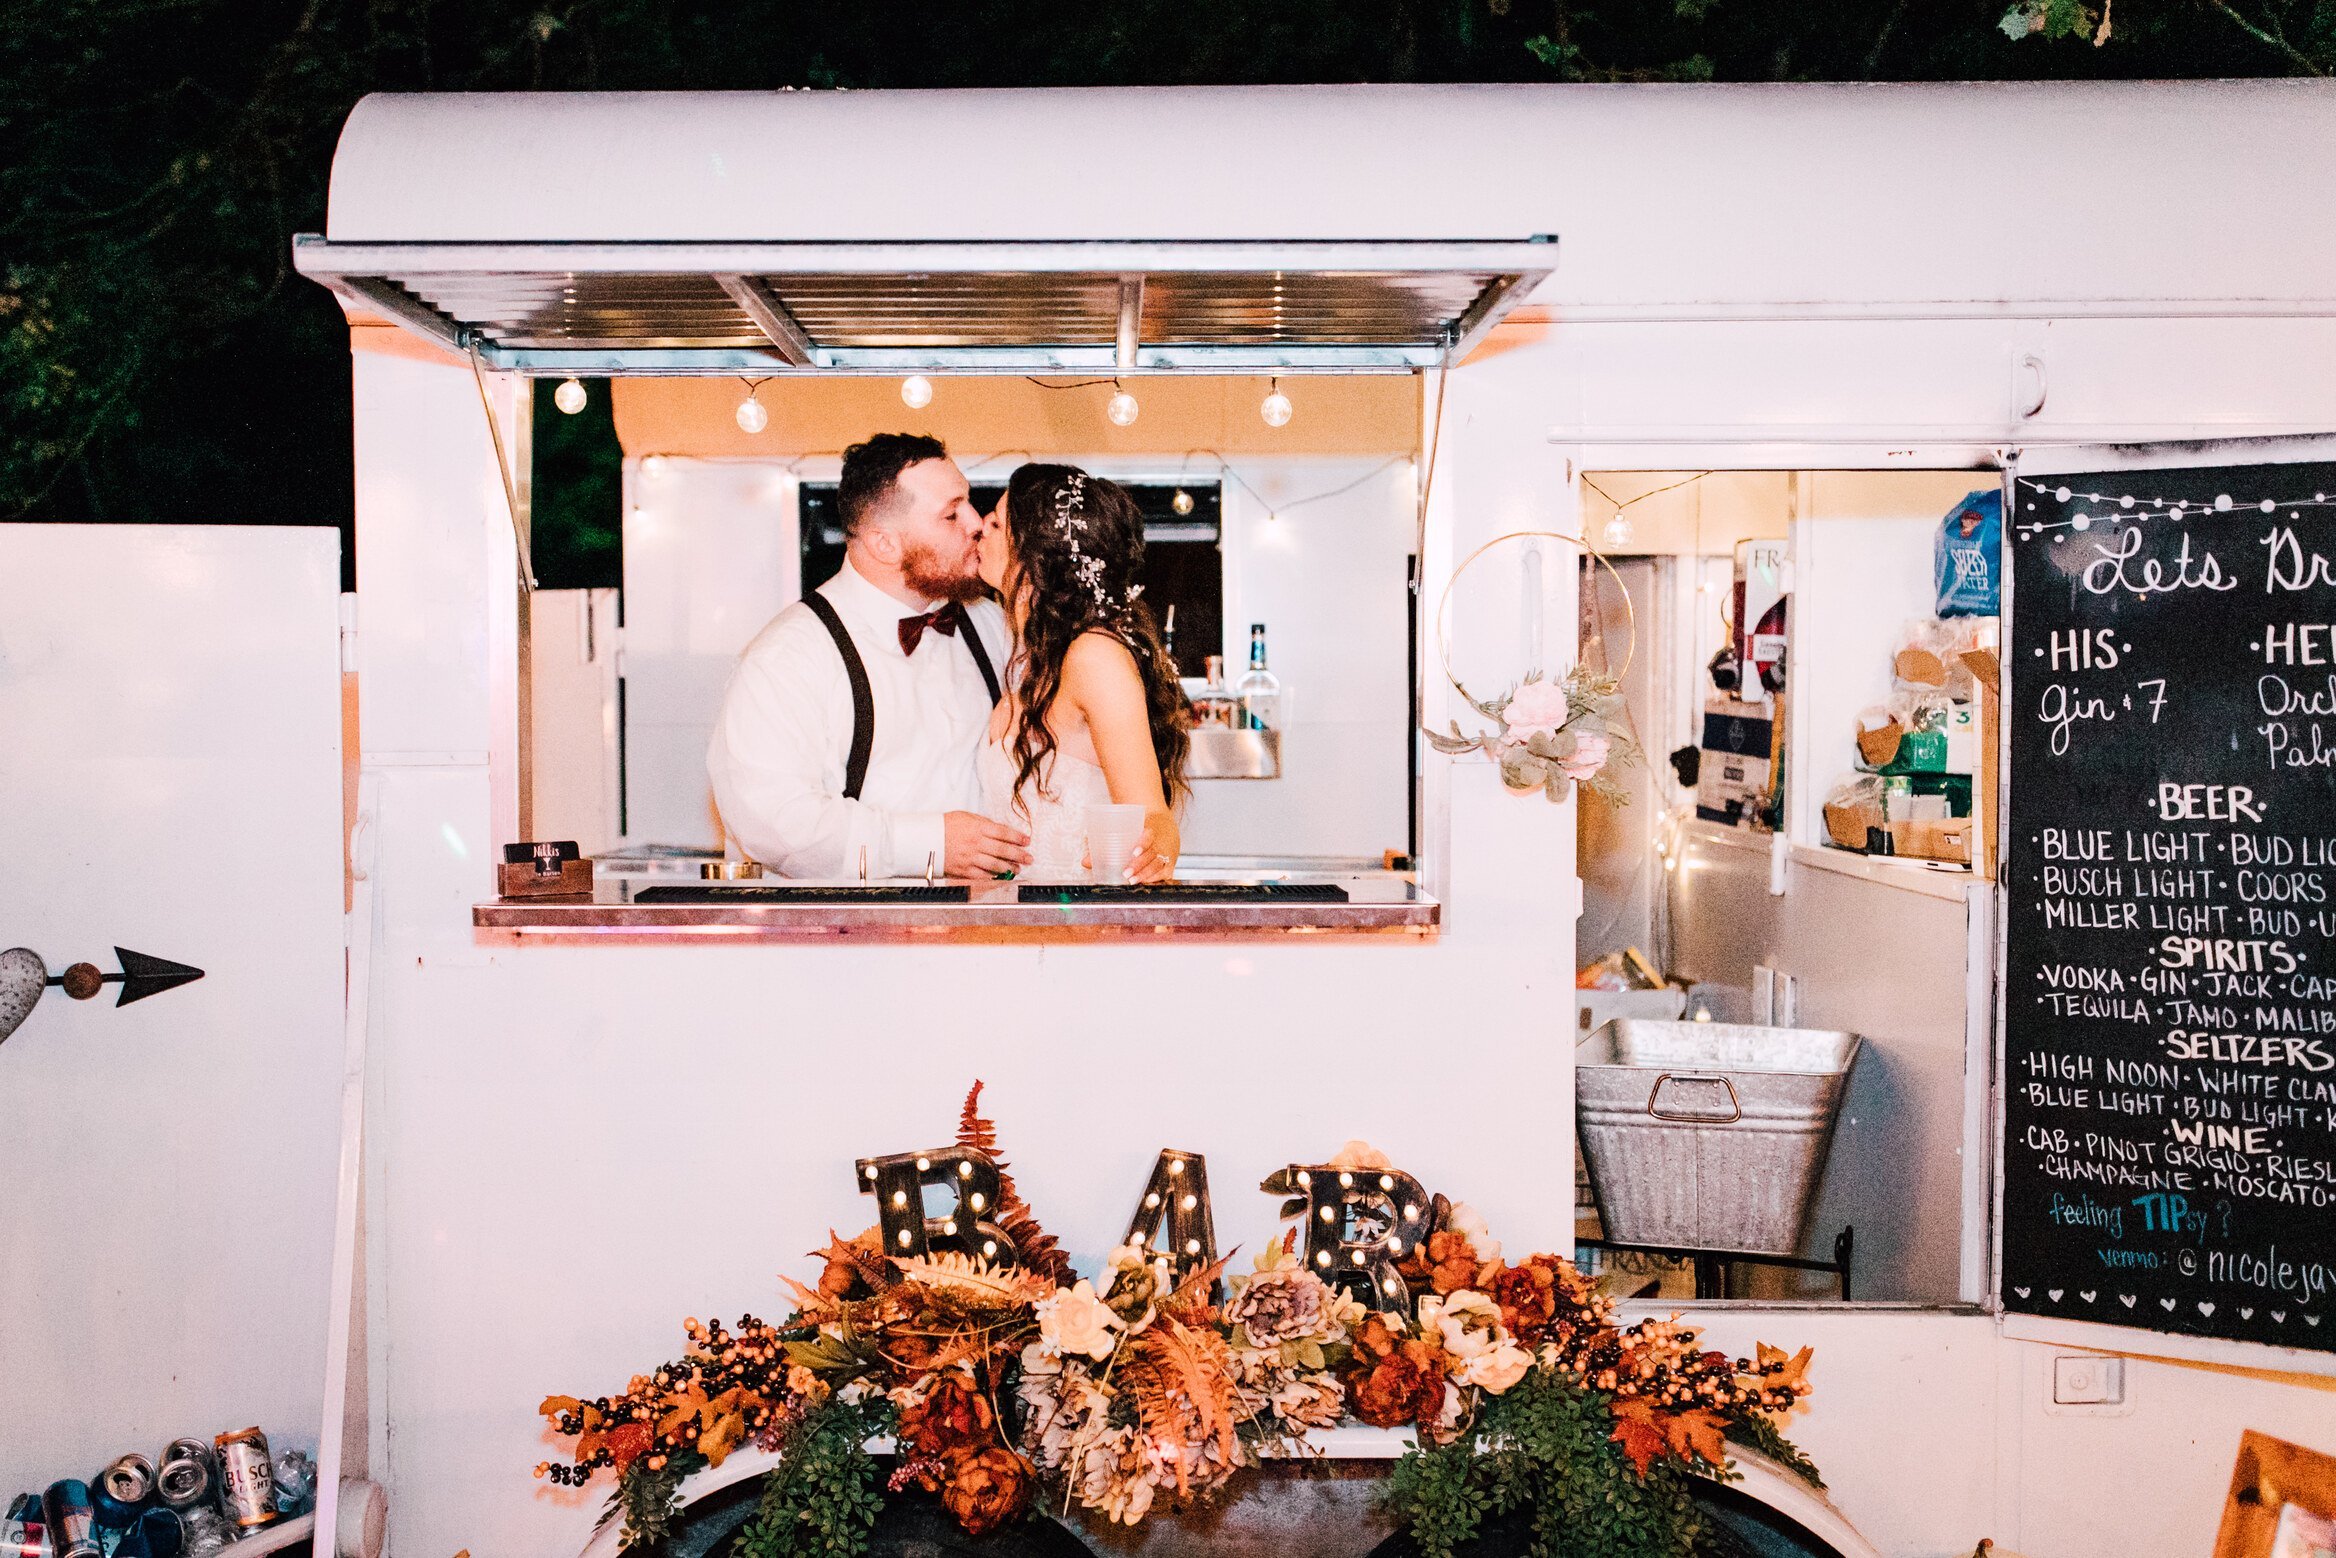  The bride and groom share a kiss inside the mobile bar at their rustic wedding reception 